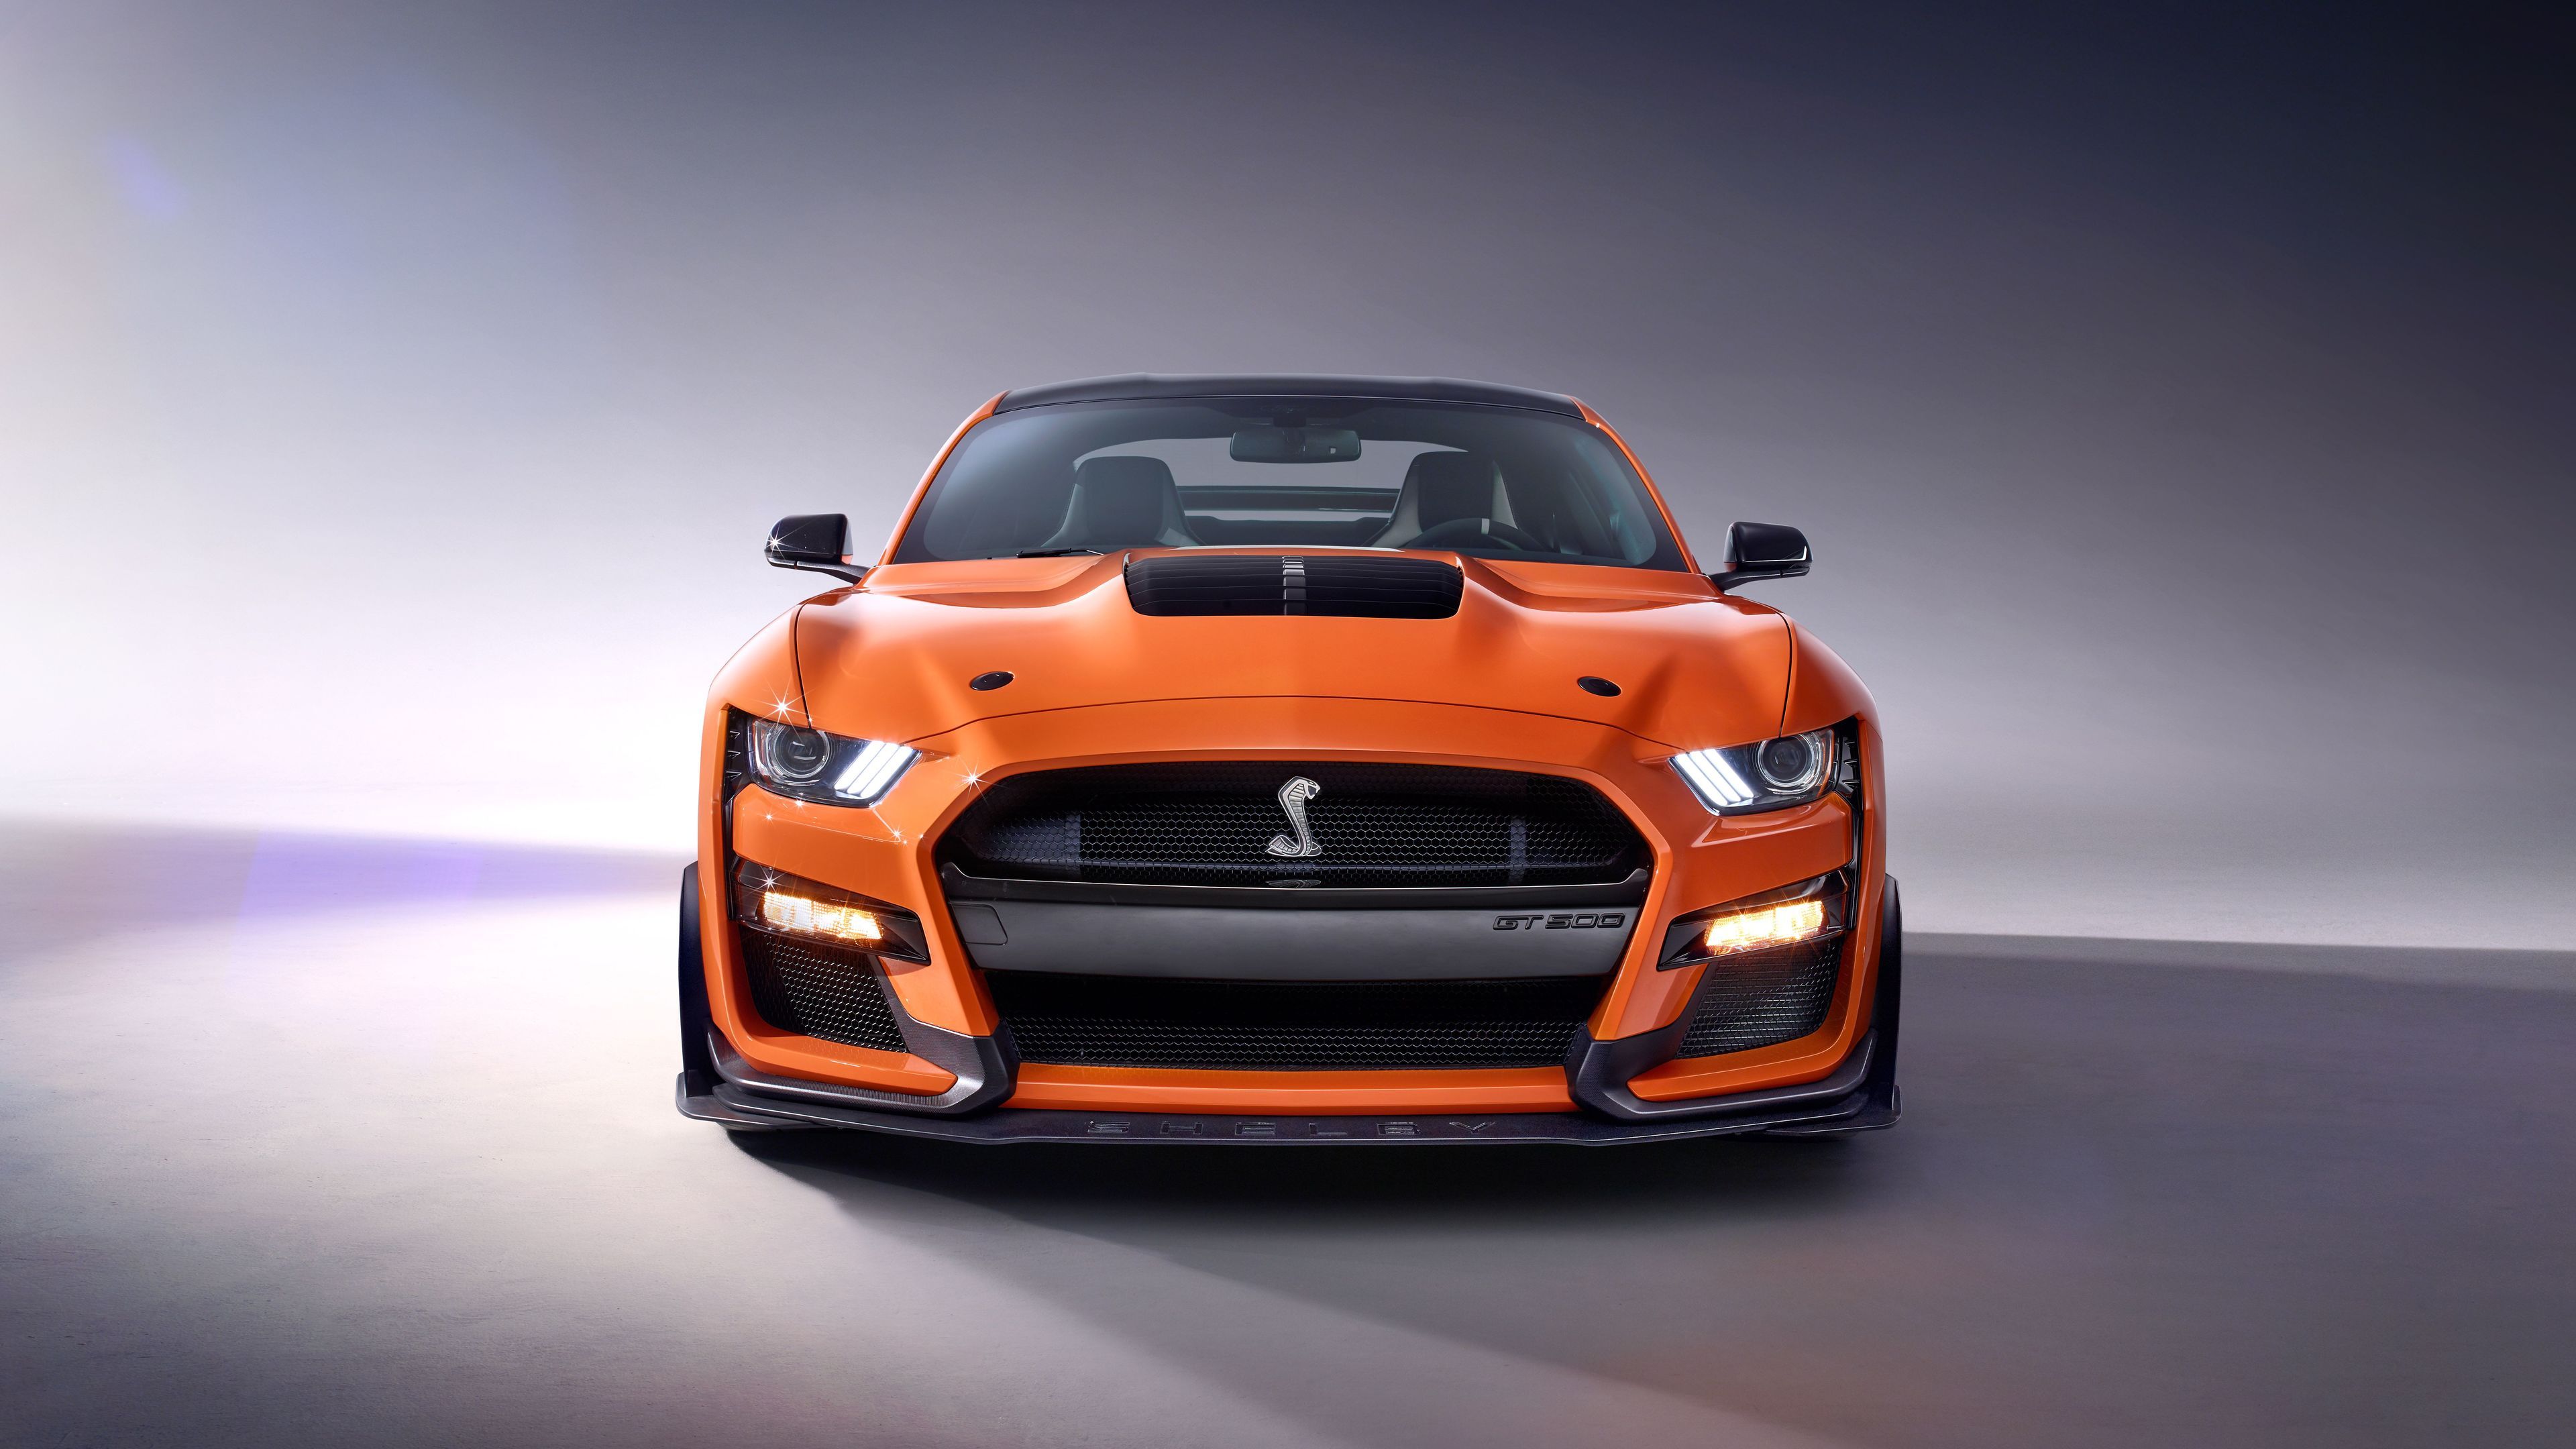 Wallpaper 4k 2020 Ford Mustang Shelby GT500 Front 4k 2020 Cars Wallpaper, 4k Wallpaper, 5k Wallpaper, Cars Wallpaper, Ford Mustang Wallpaper, Hd Wallpaper, Mustang Wallpaper